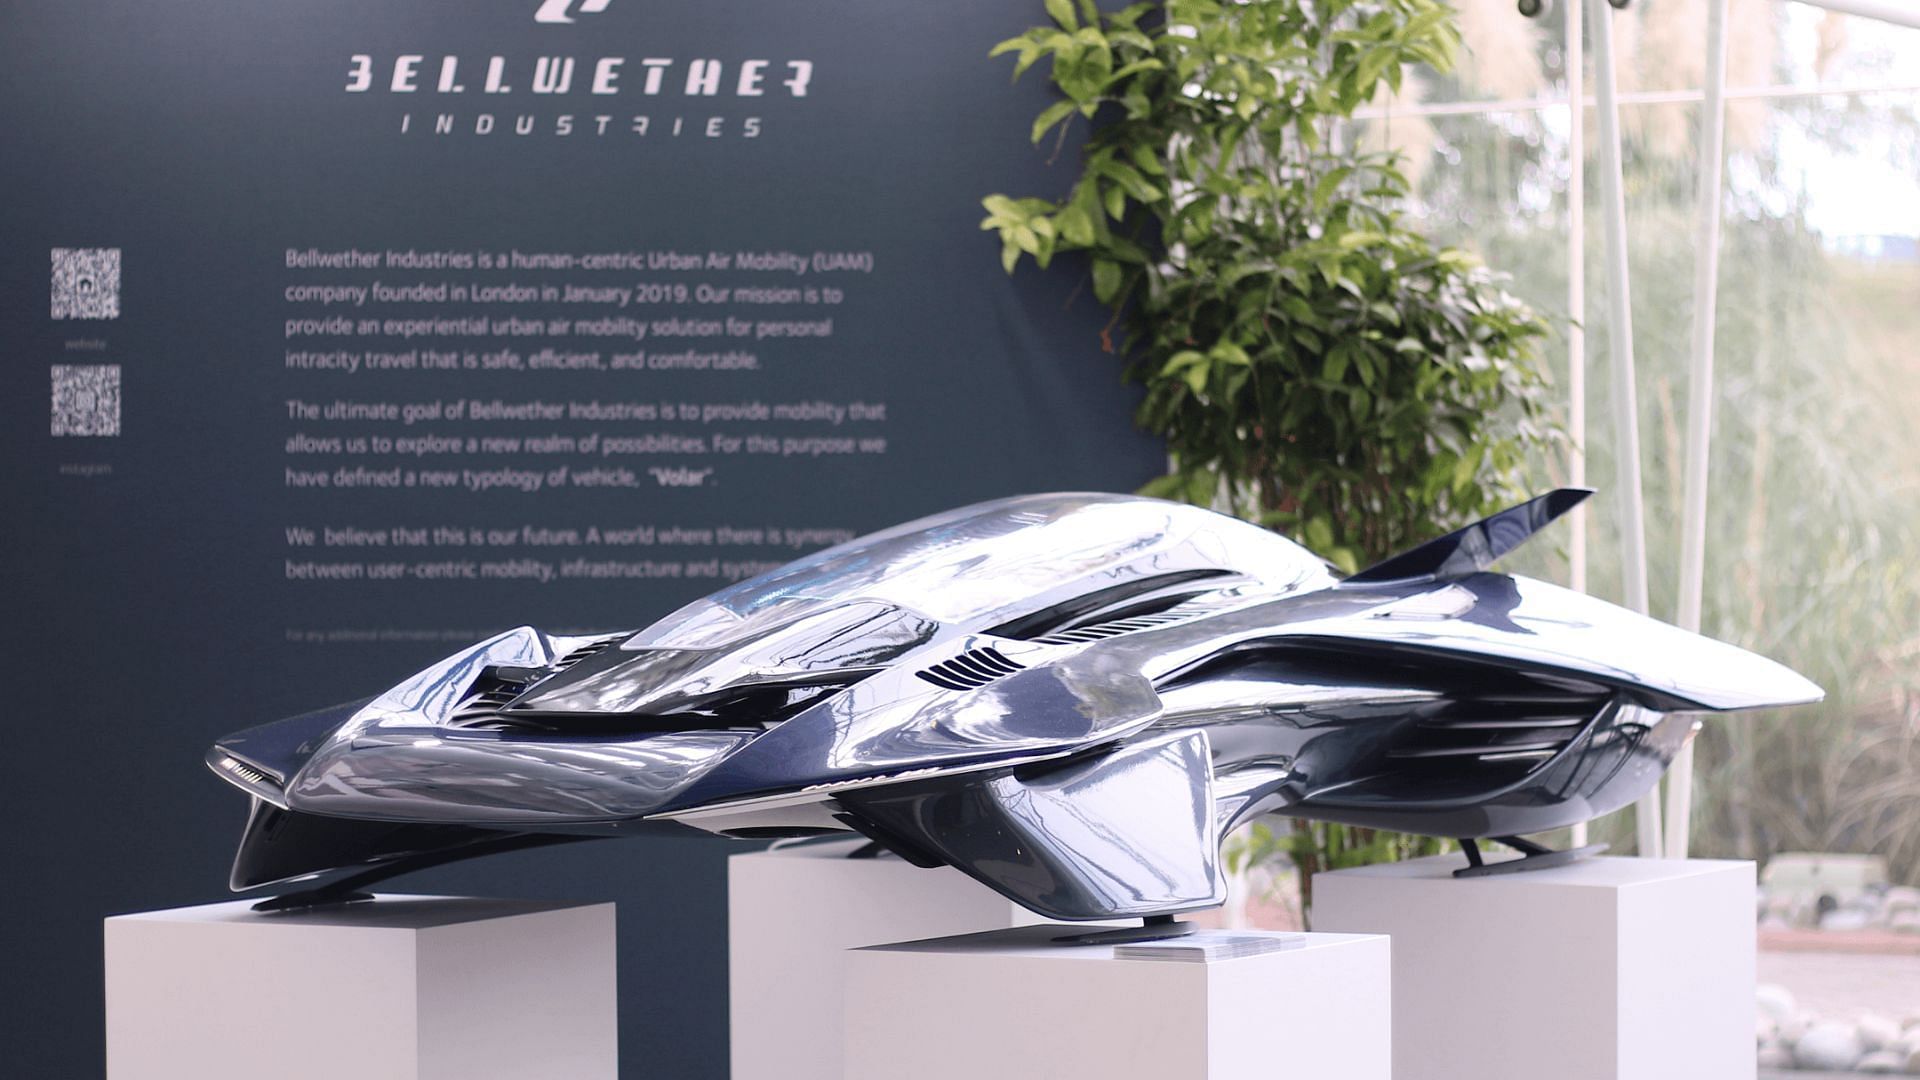 Here&#039;s a model of the Bellwether eVTOL (Image via bellwether-industries.com)